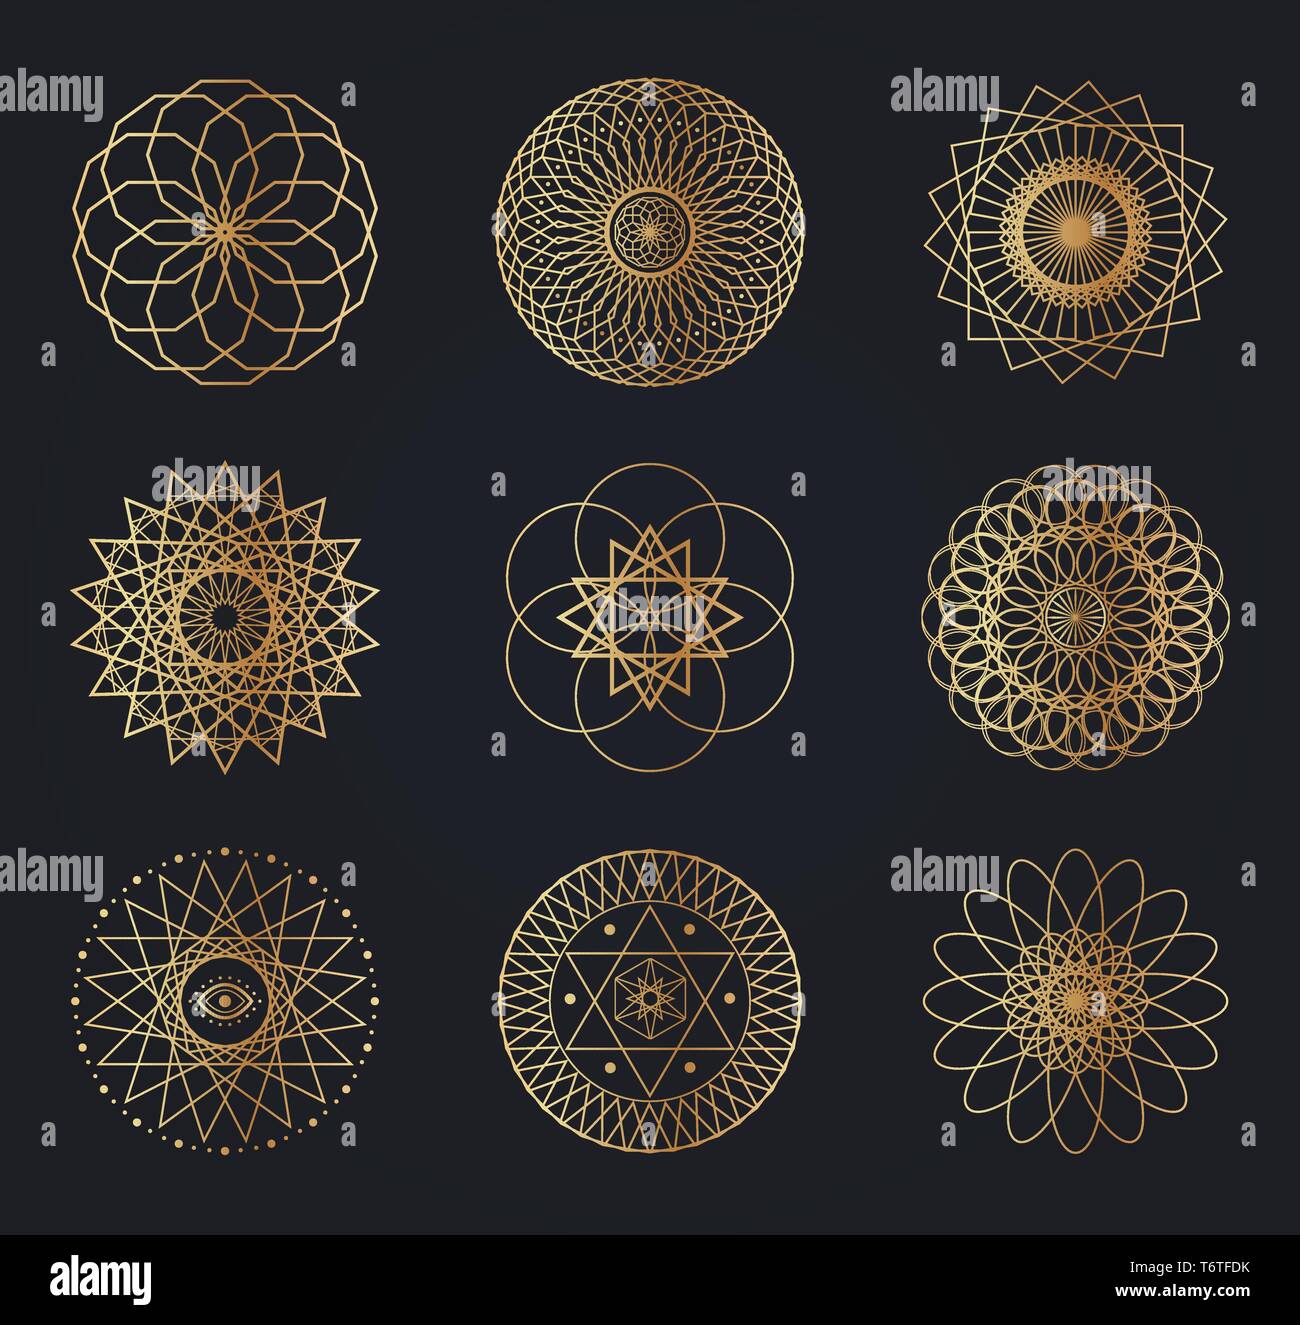 Sacred geometry symbols. Set of vector design elements isolated on black background. Stock Vector